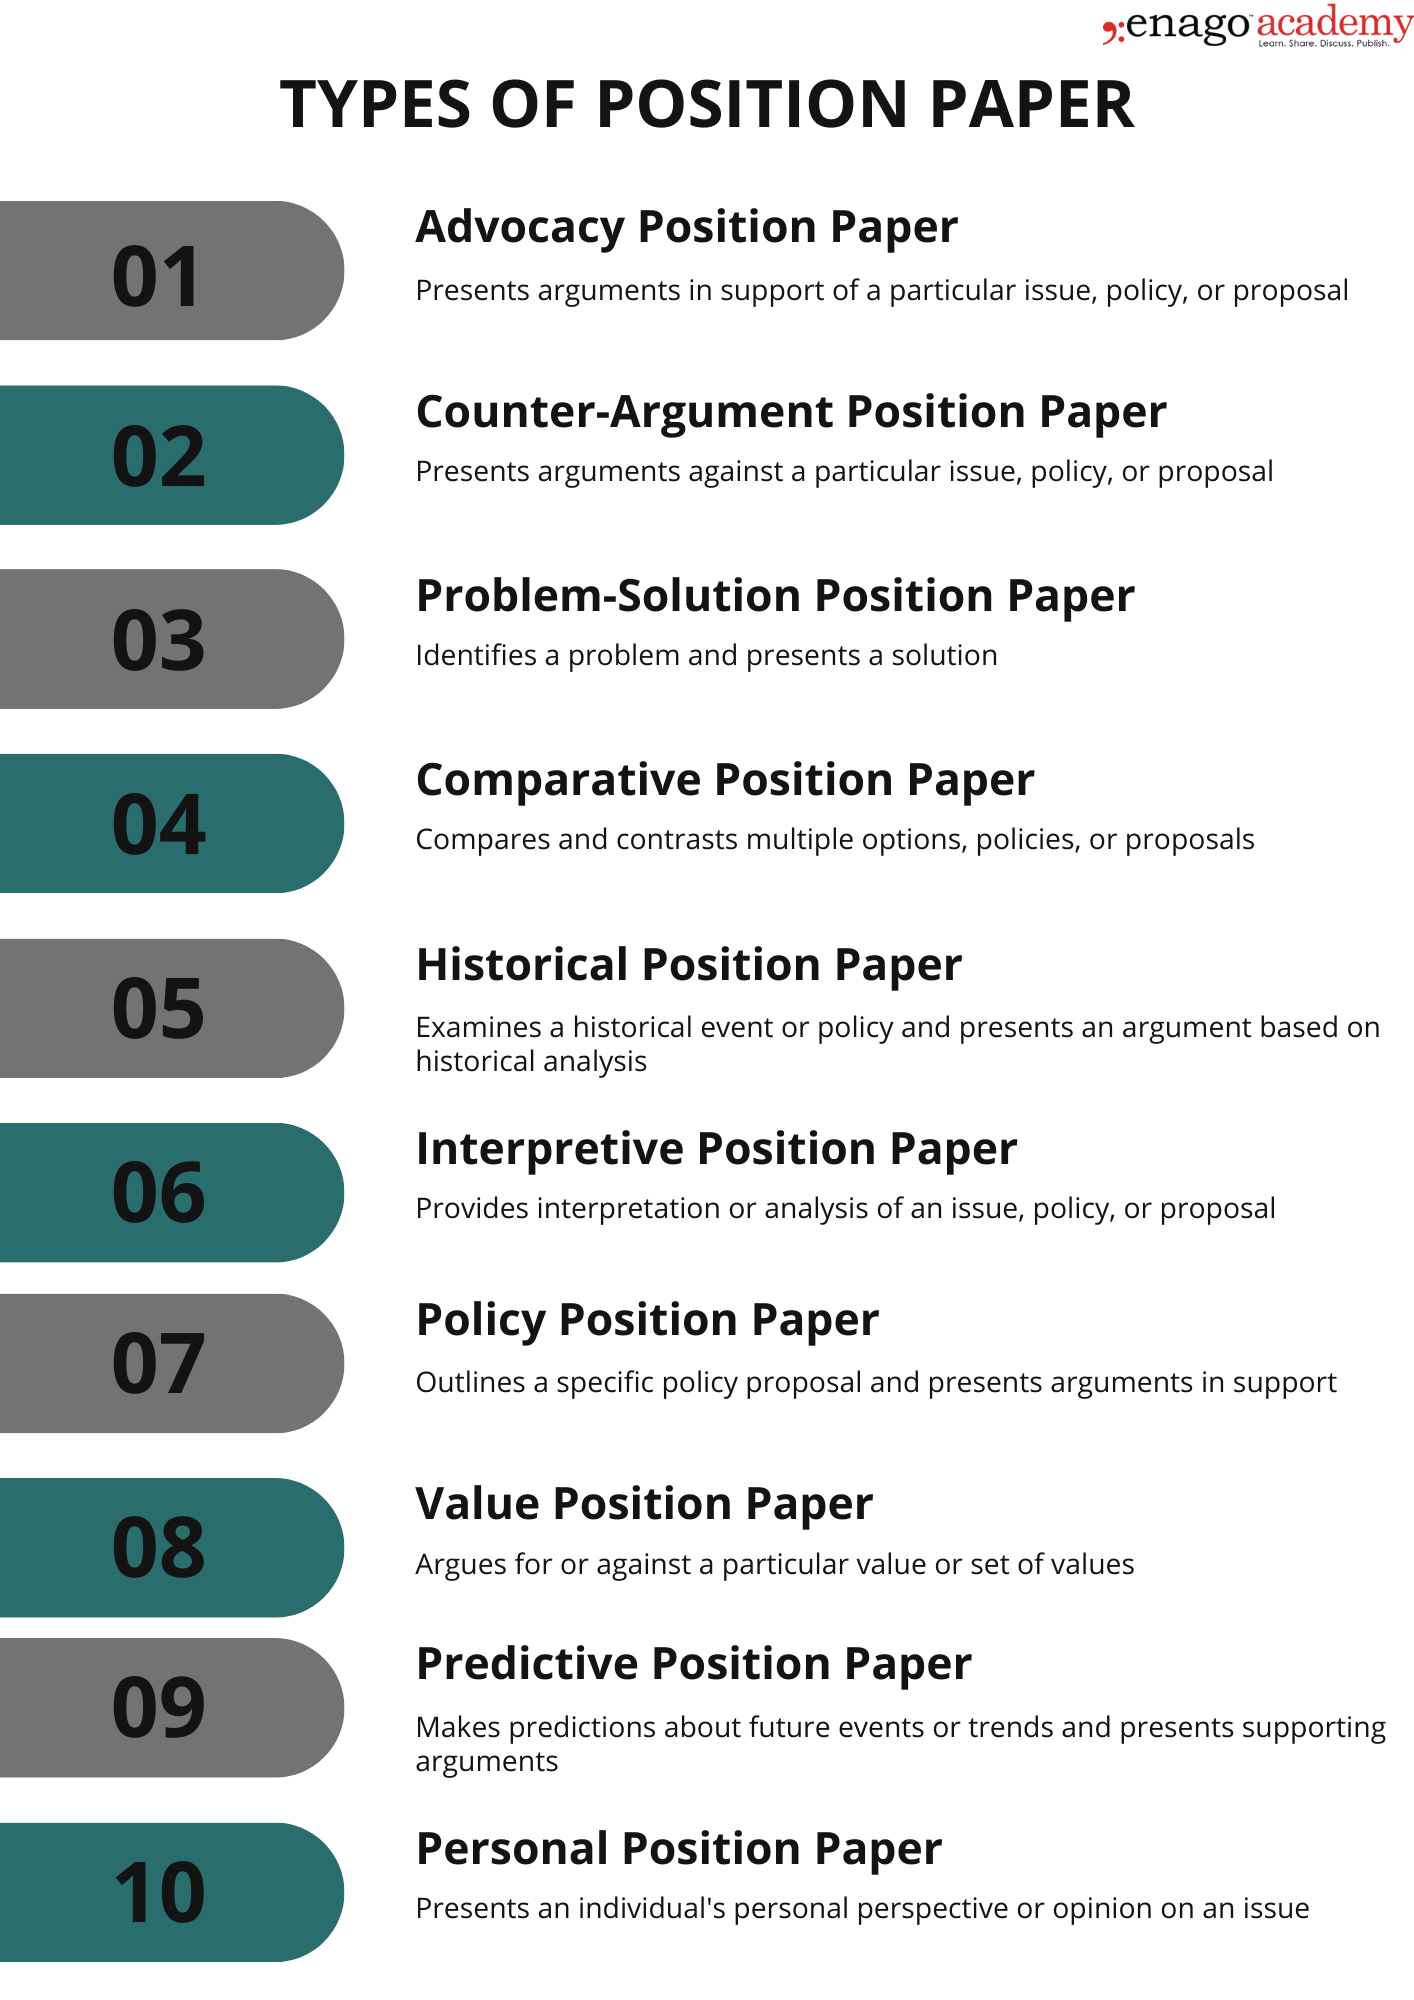 Types of Position Paper